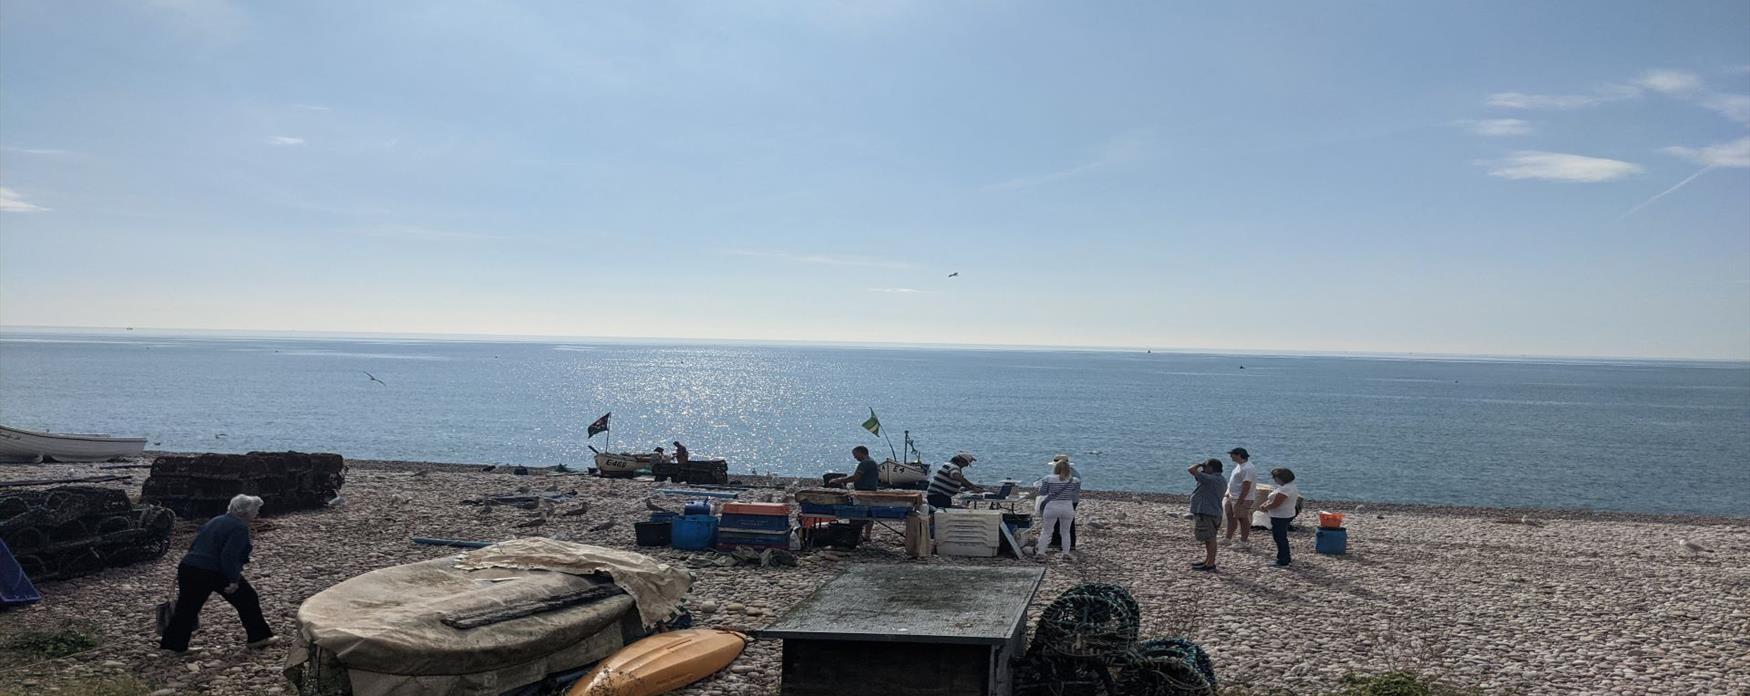 People gather around local fisherman preparing fish on a pebble beach in East Devon. The sun is shining. The seaside town extends off into the distance on the left side and the sea glistens in the sun on the right.